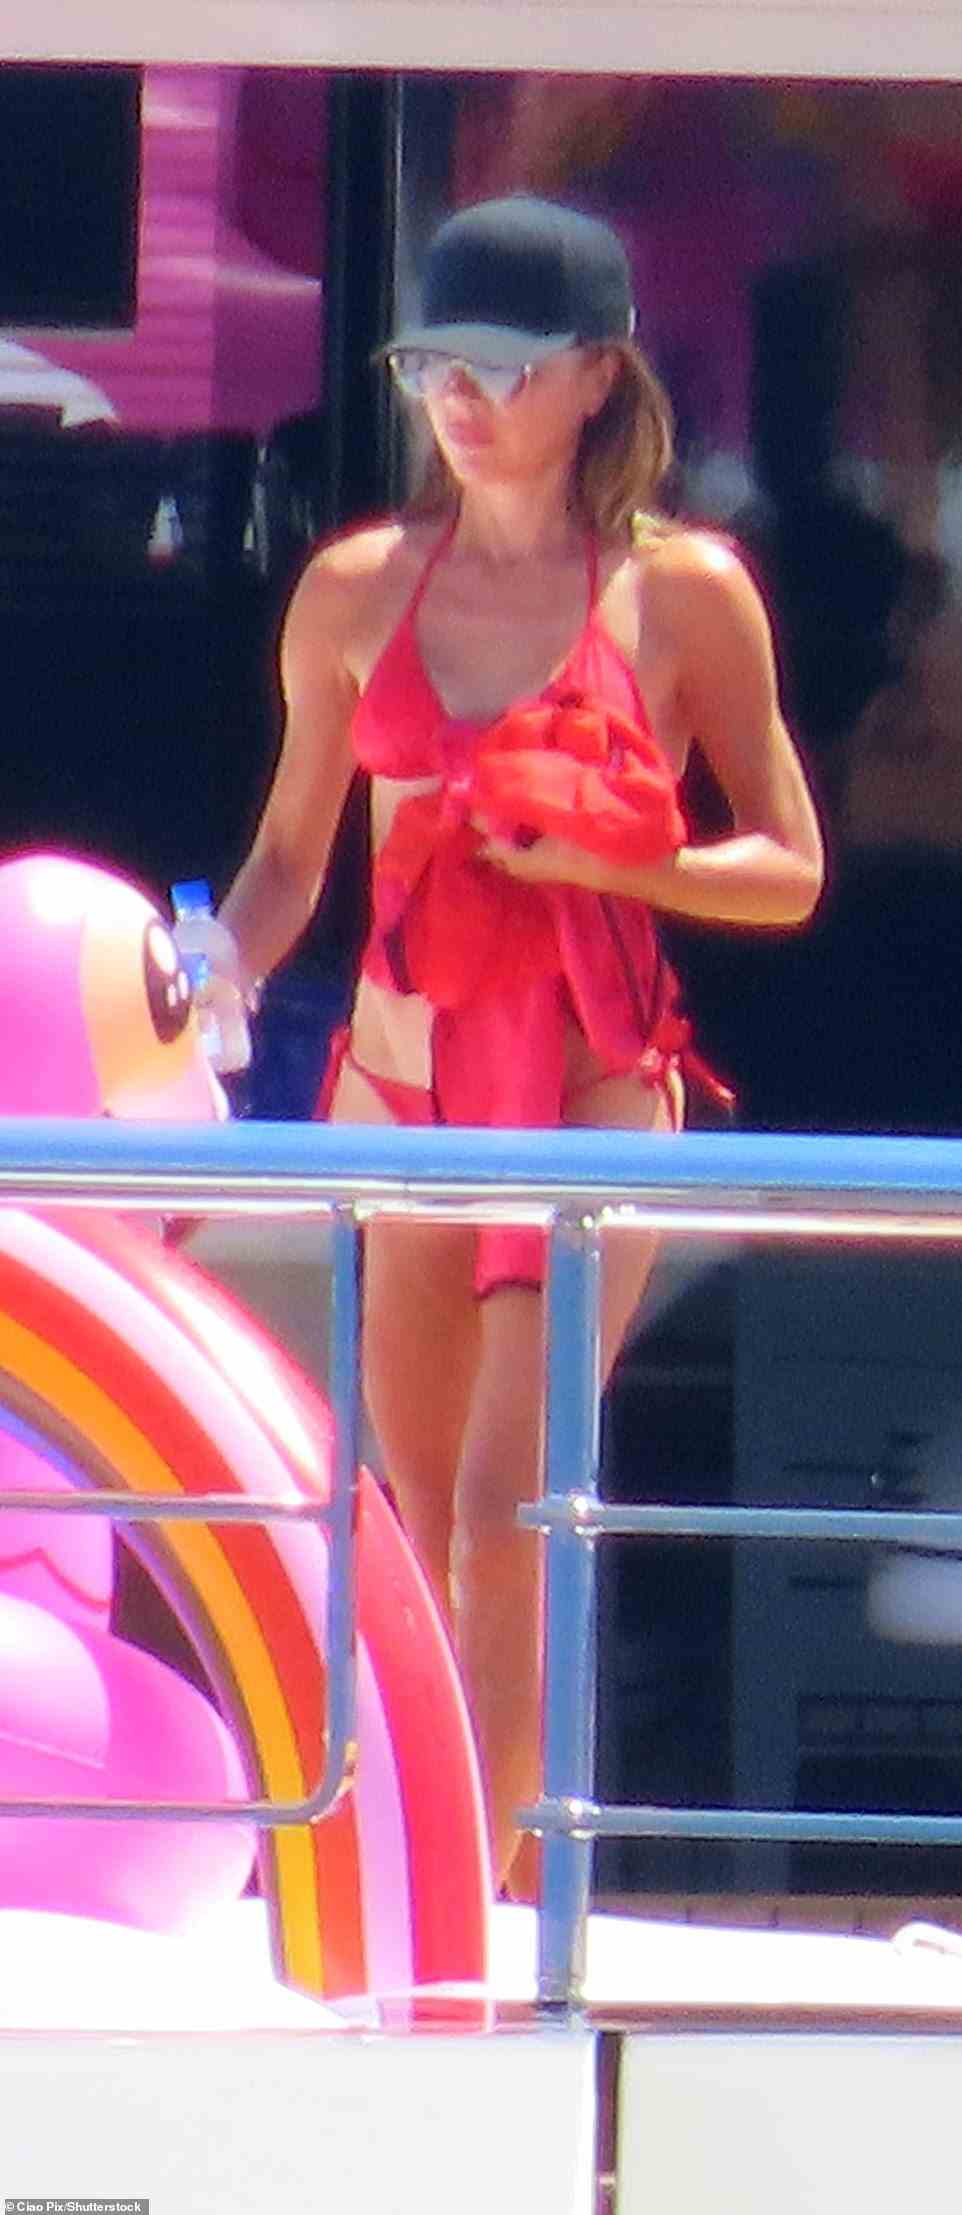 Victoria Beckham, 48, has not been shy this summer - being photographed numerous times in barely-there bikinis and figure-hugging one-pieces while vacationing with her husband, David Beckham, and their kids last month